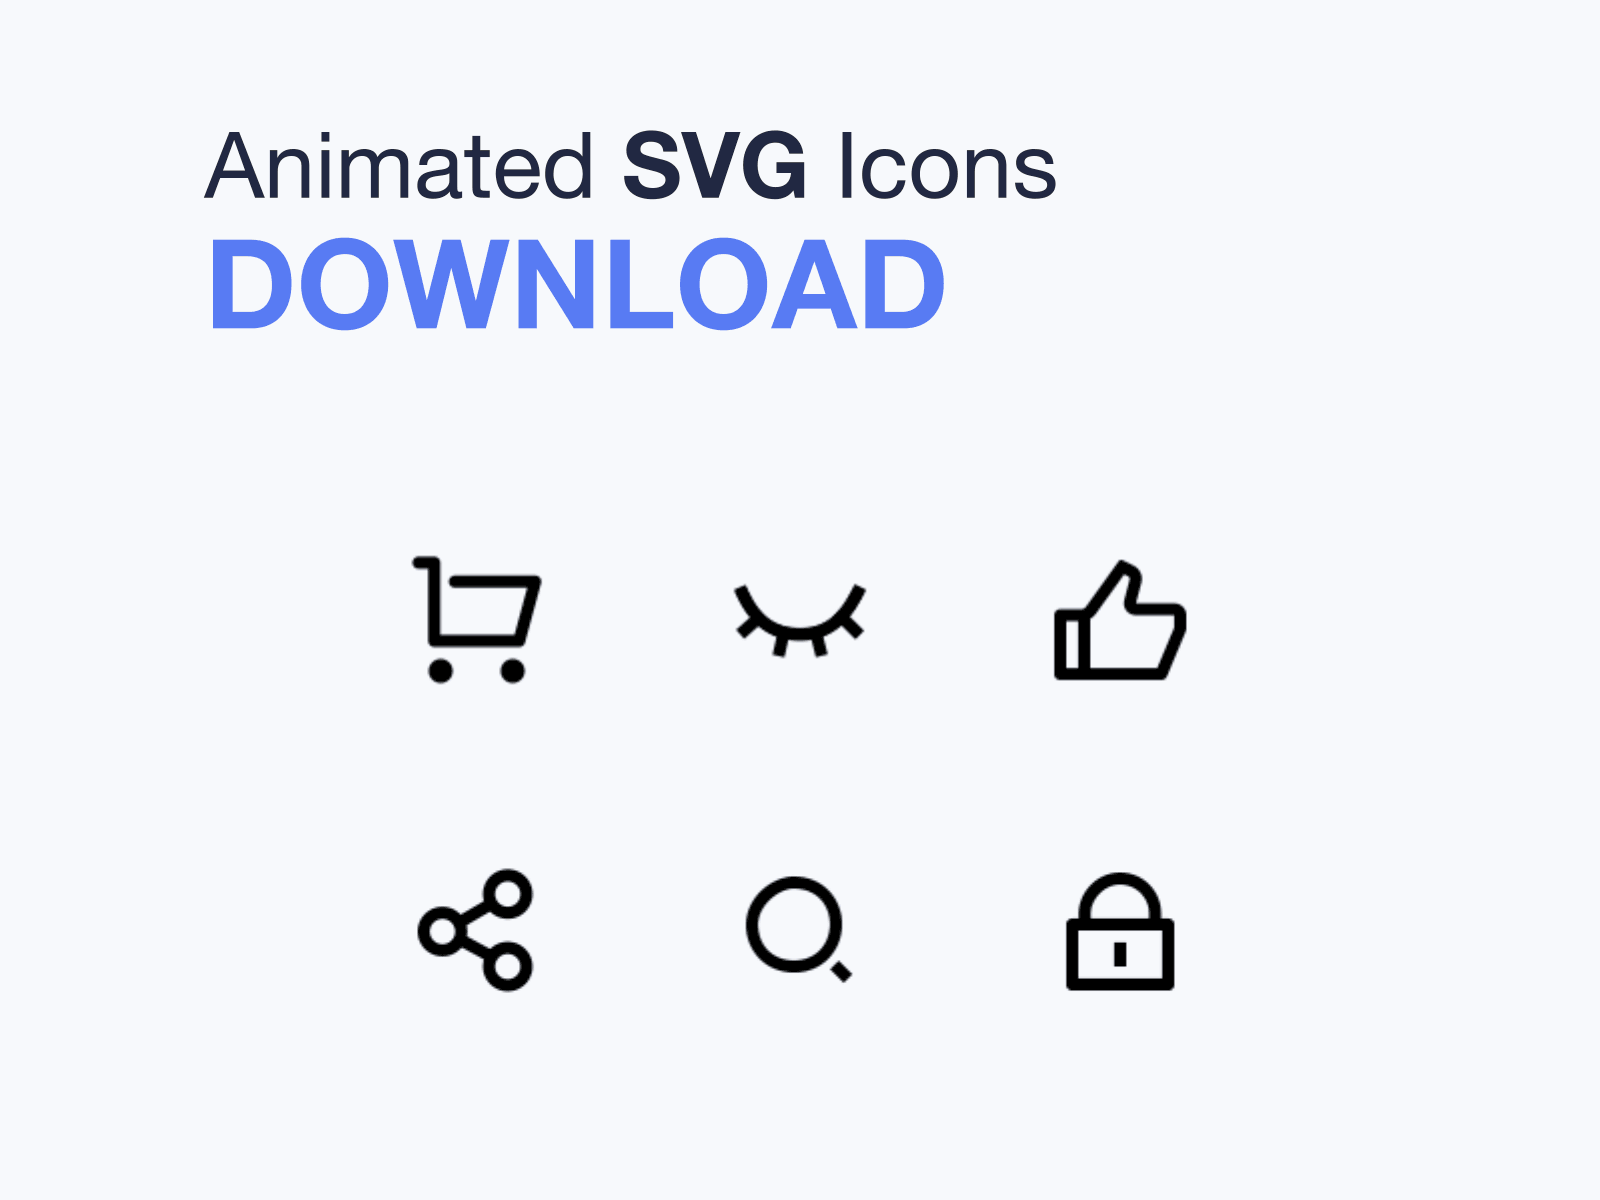 Animated SVG icons download by Ashraf Omran on Dribbble